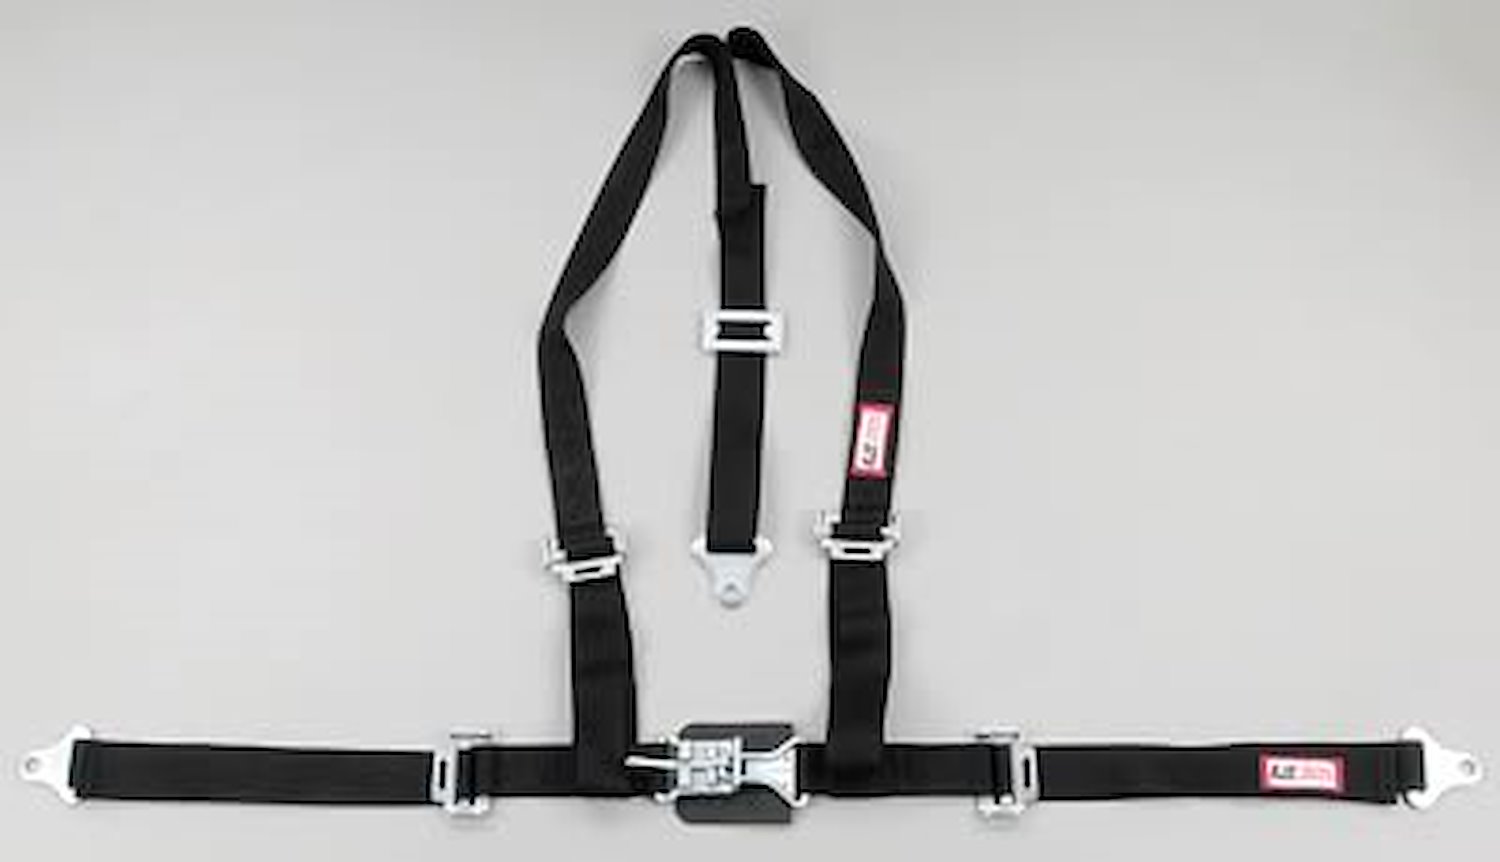 NON-SFI L&L HARNESS 3 PULL UP Lap Belt BOLT SEWN IN 2 S.H. Individual FLOOR Mount w/STERNUM STRAP WRAP/BOLT BLUE